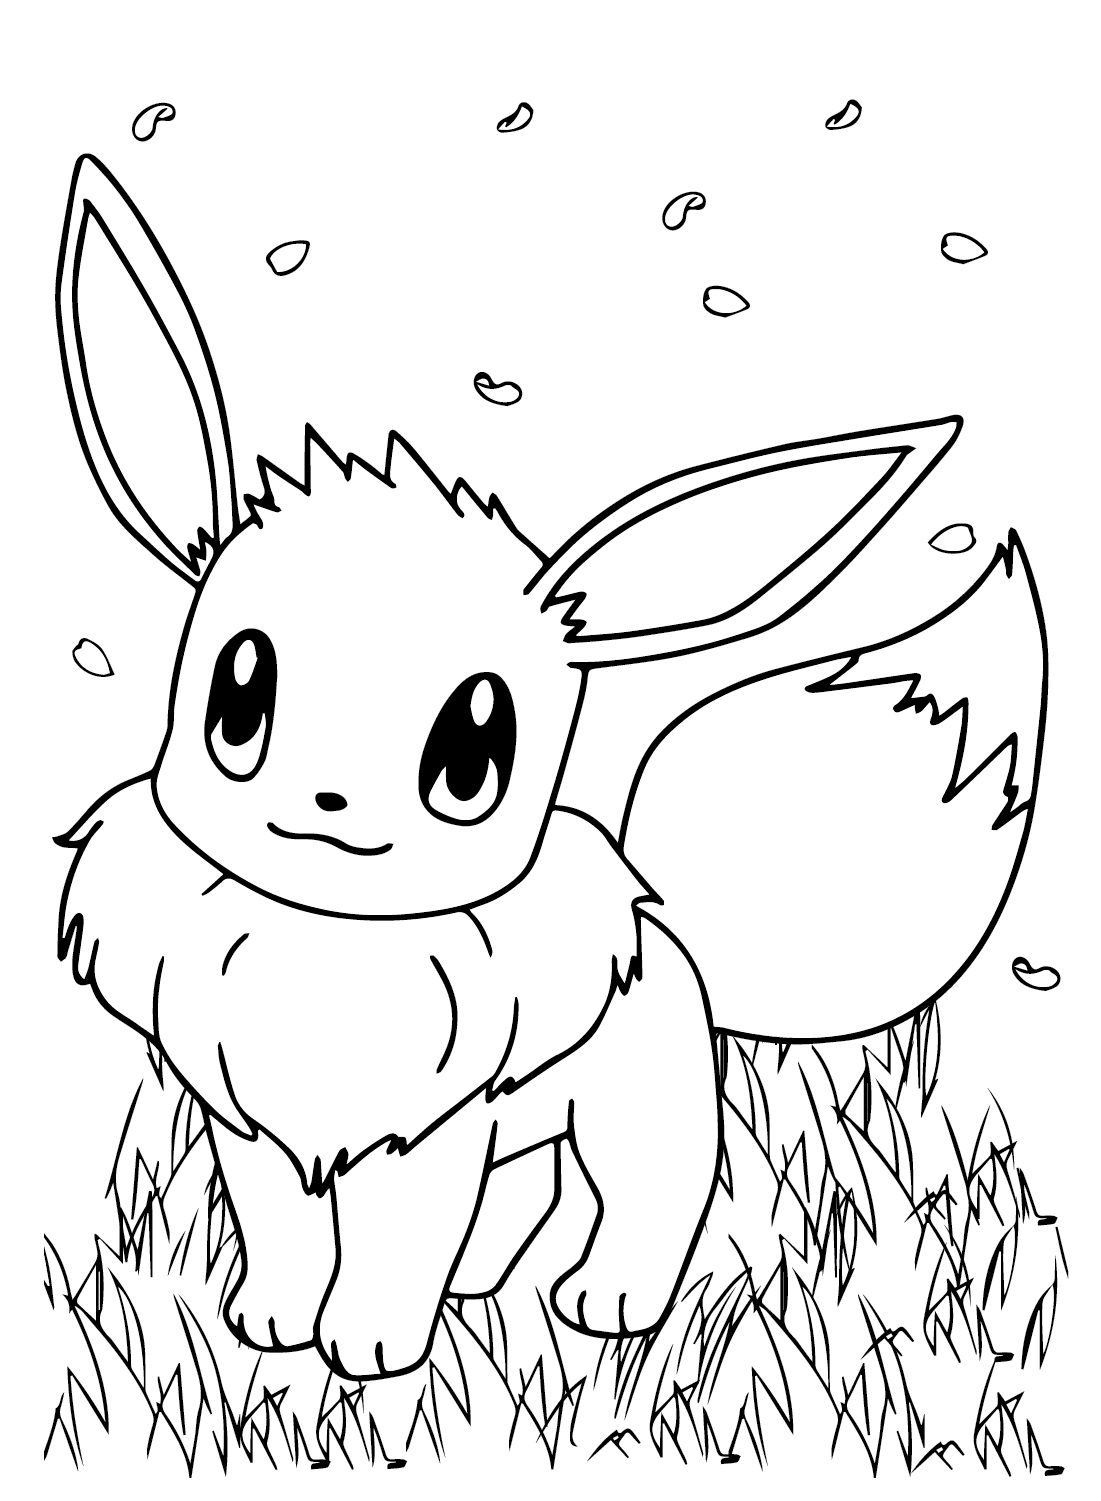 Eevee and pikachu coloring page